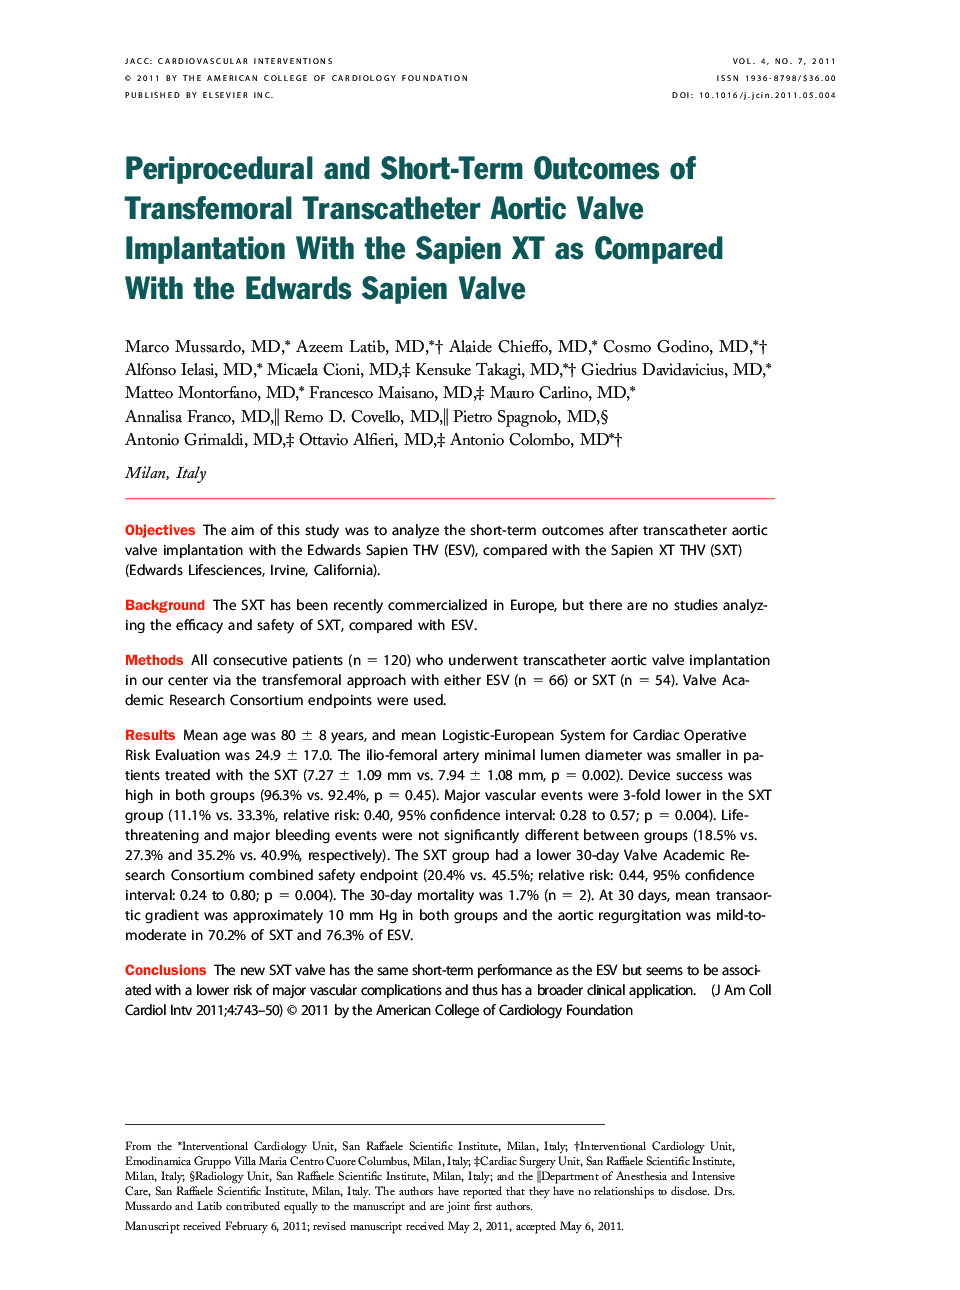 Periprocedural and Short-Term Outcomes of Transfemoral Transcatheter Aortic Valve Implantation With the Sapien XT as Compared With the Edwards Sapien Valve 